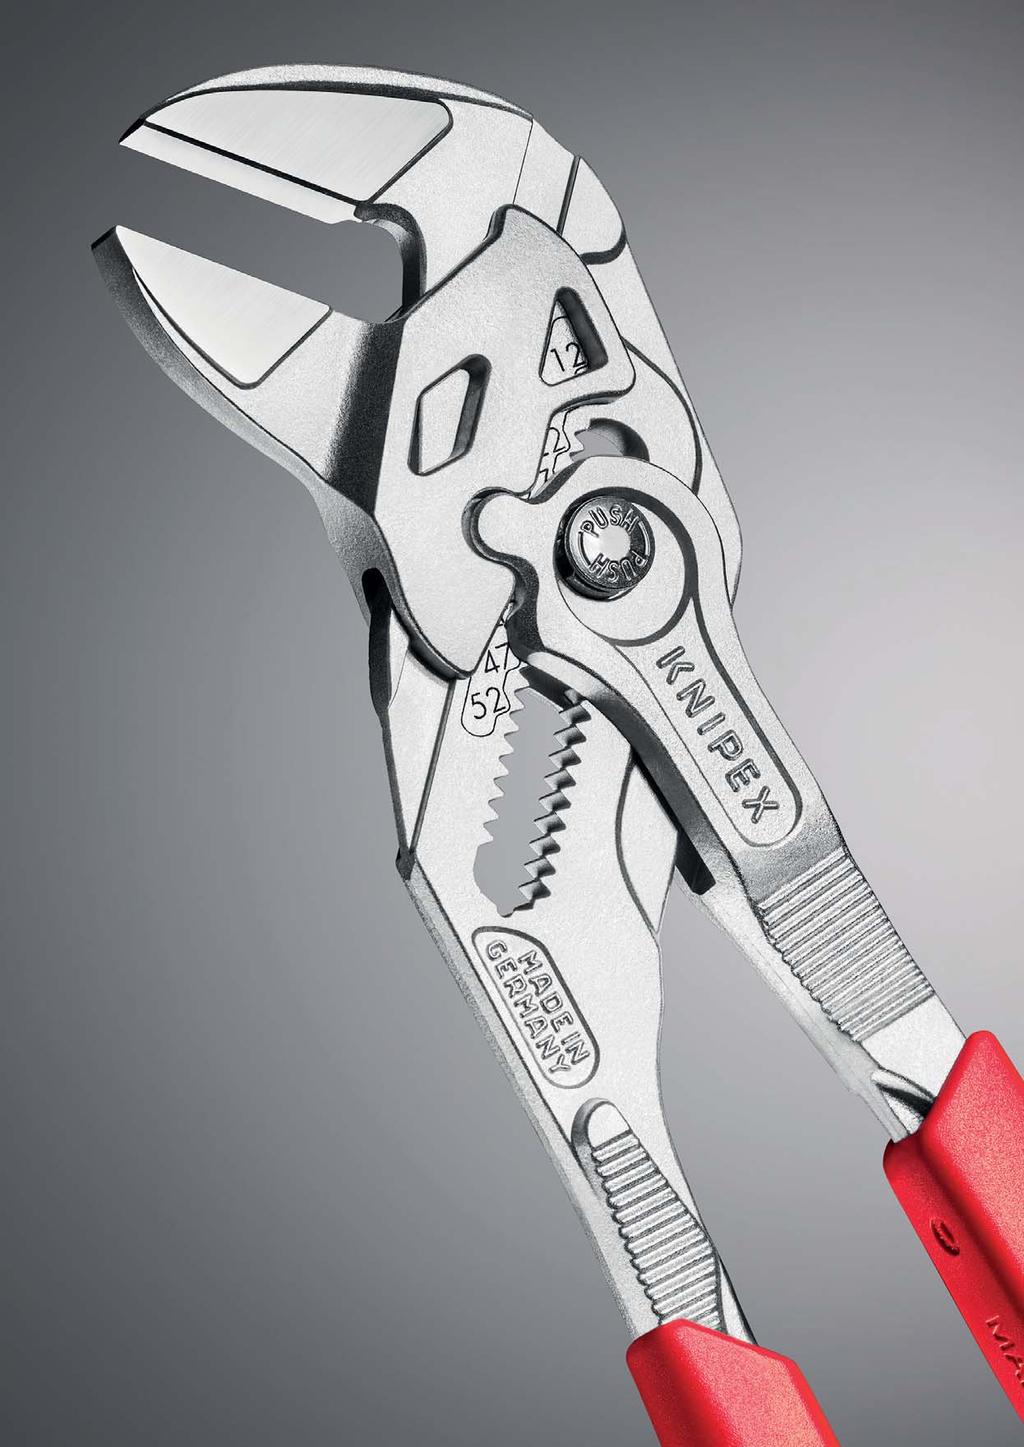 Pliers Wrench Greater gripping